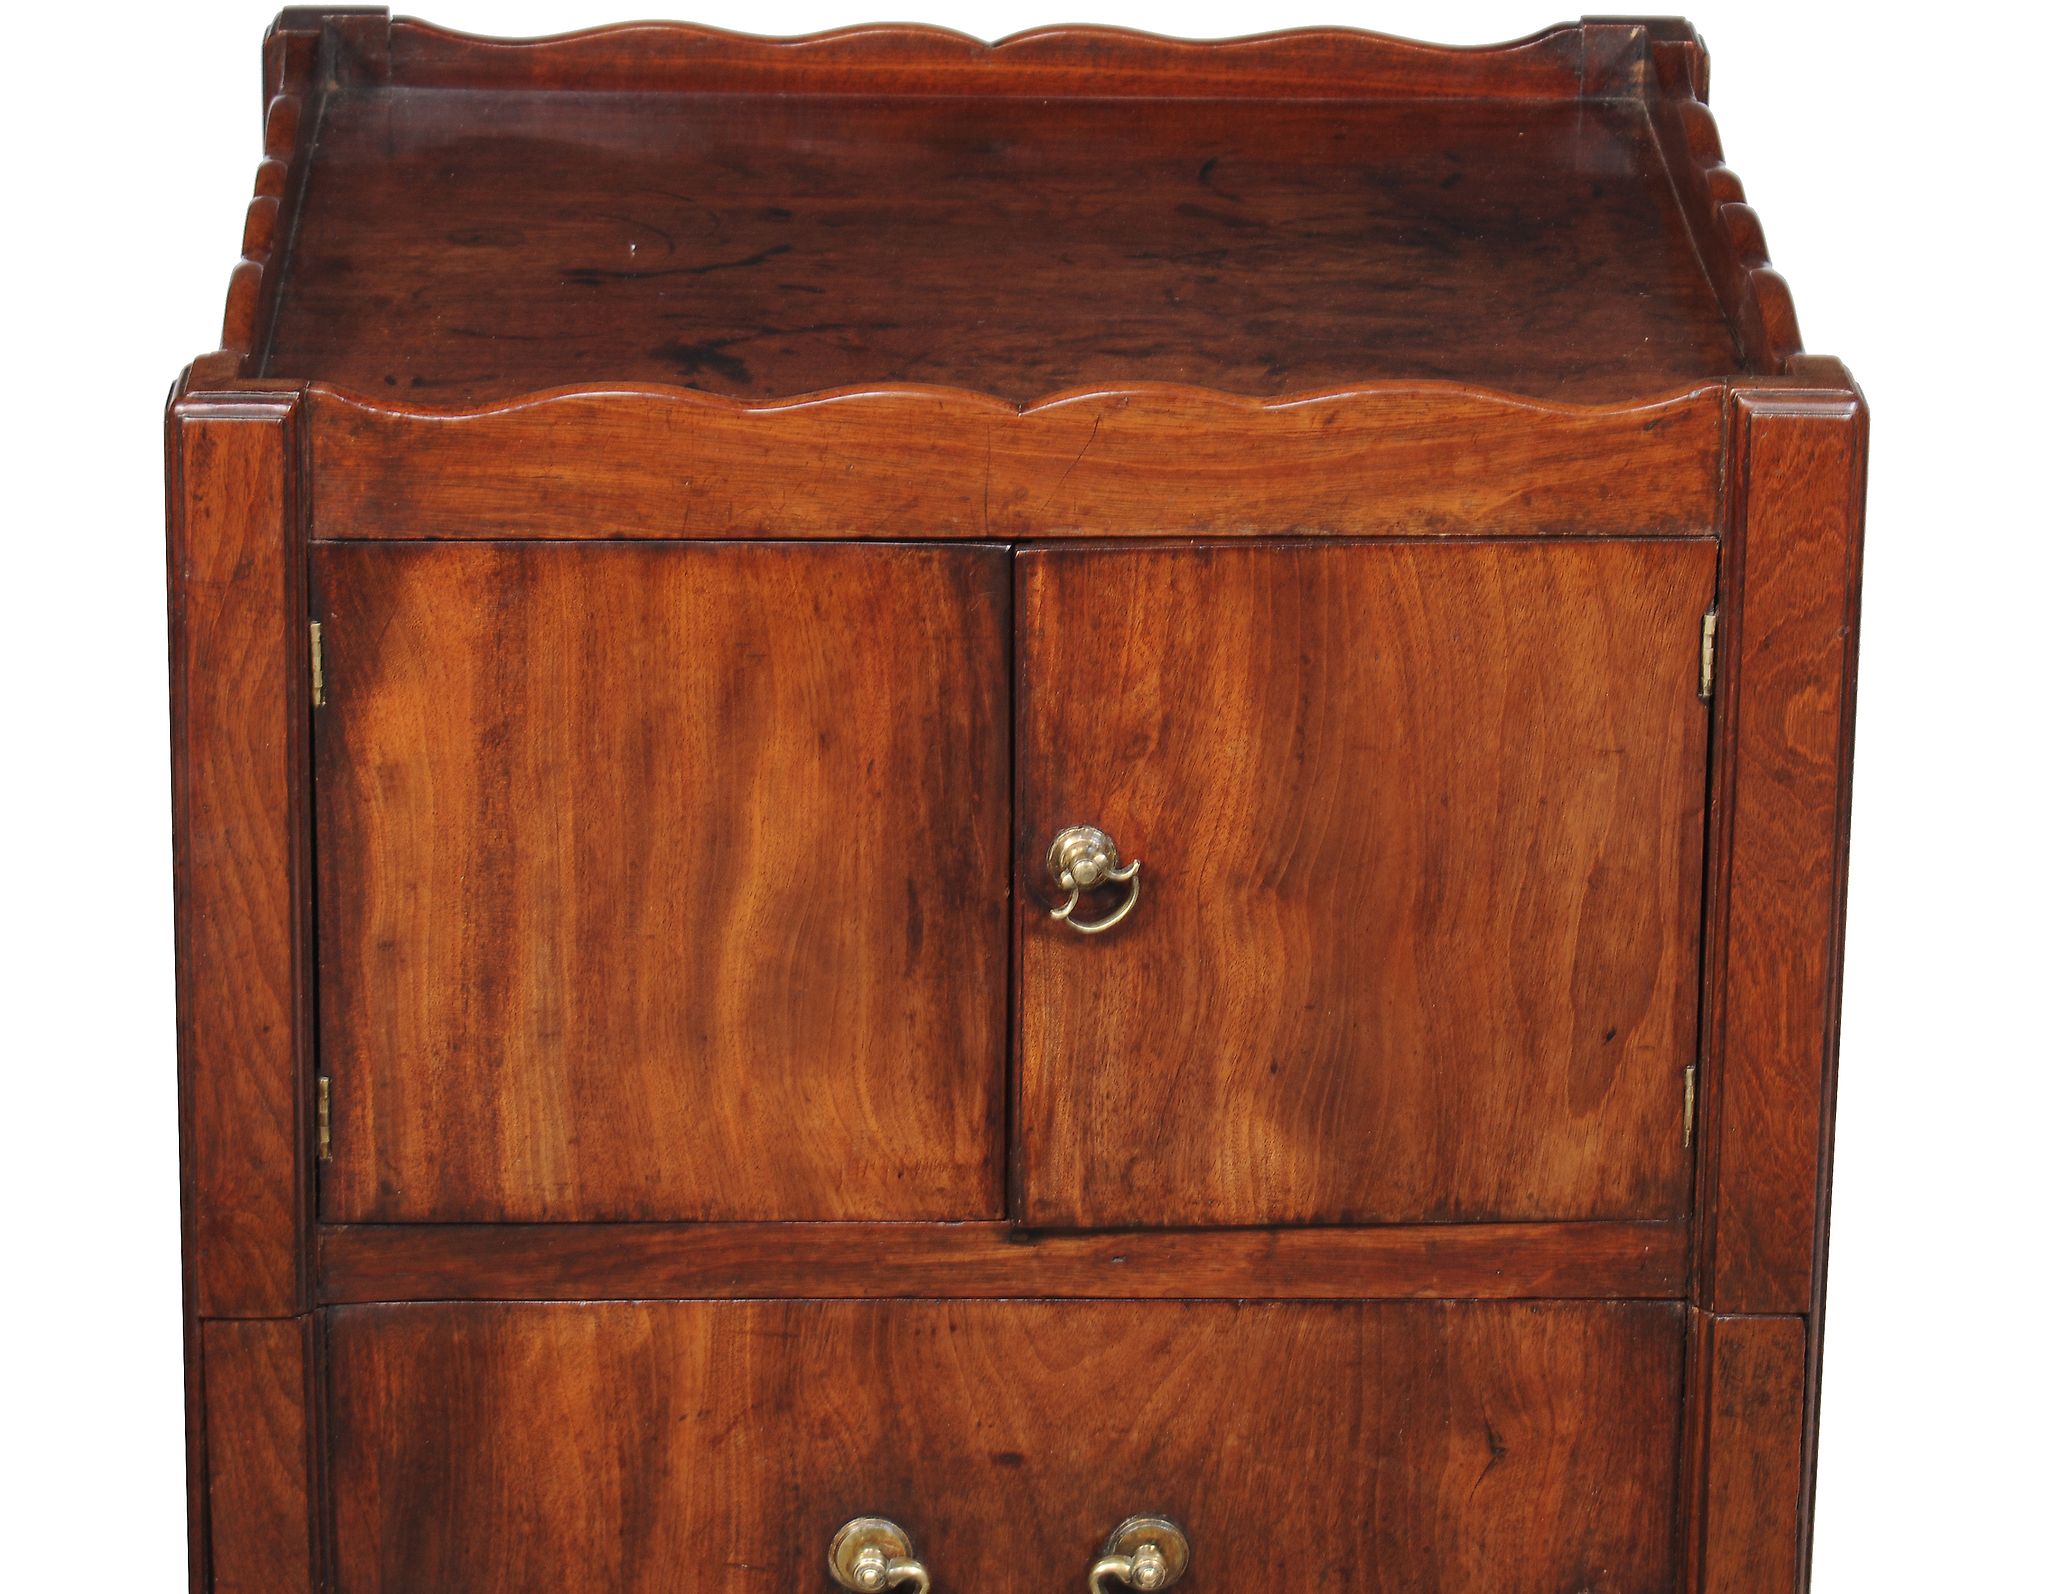 A George III mahogany night commode, circa 1780, with a pair of cupboard doors above the sliding - Image 3 of 3